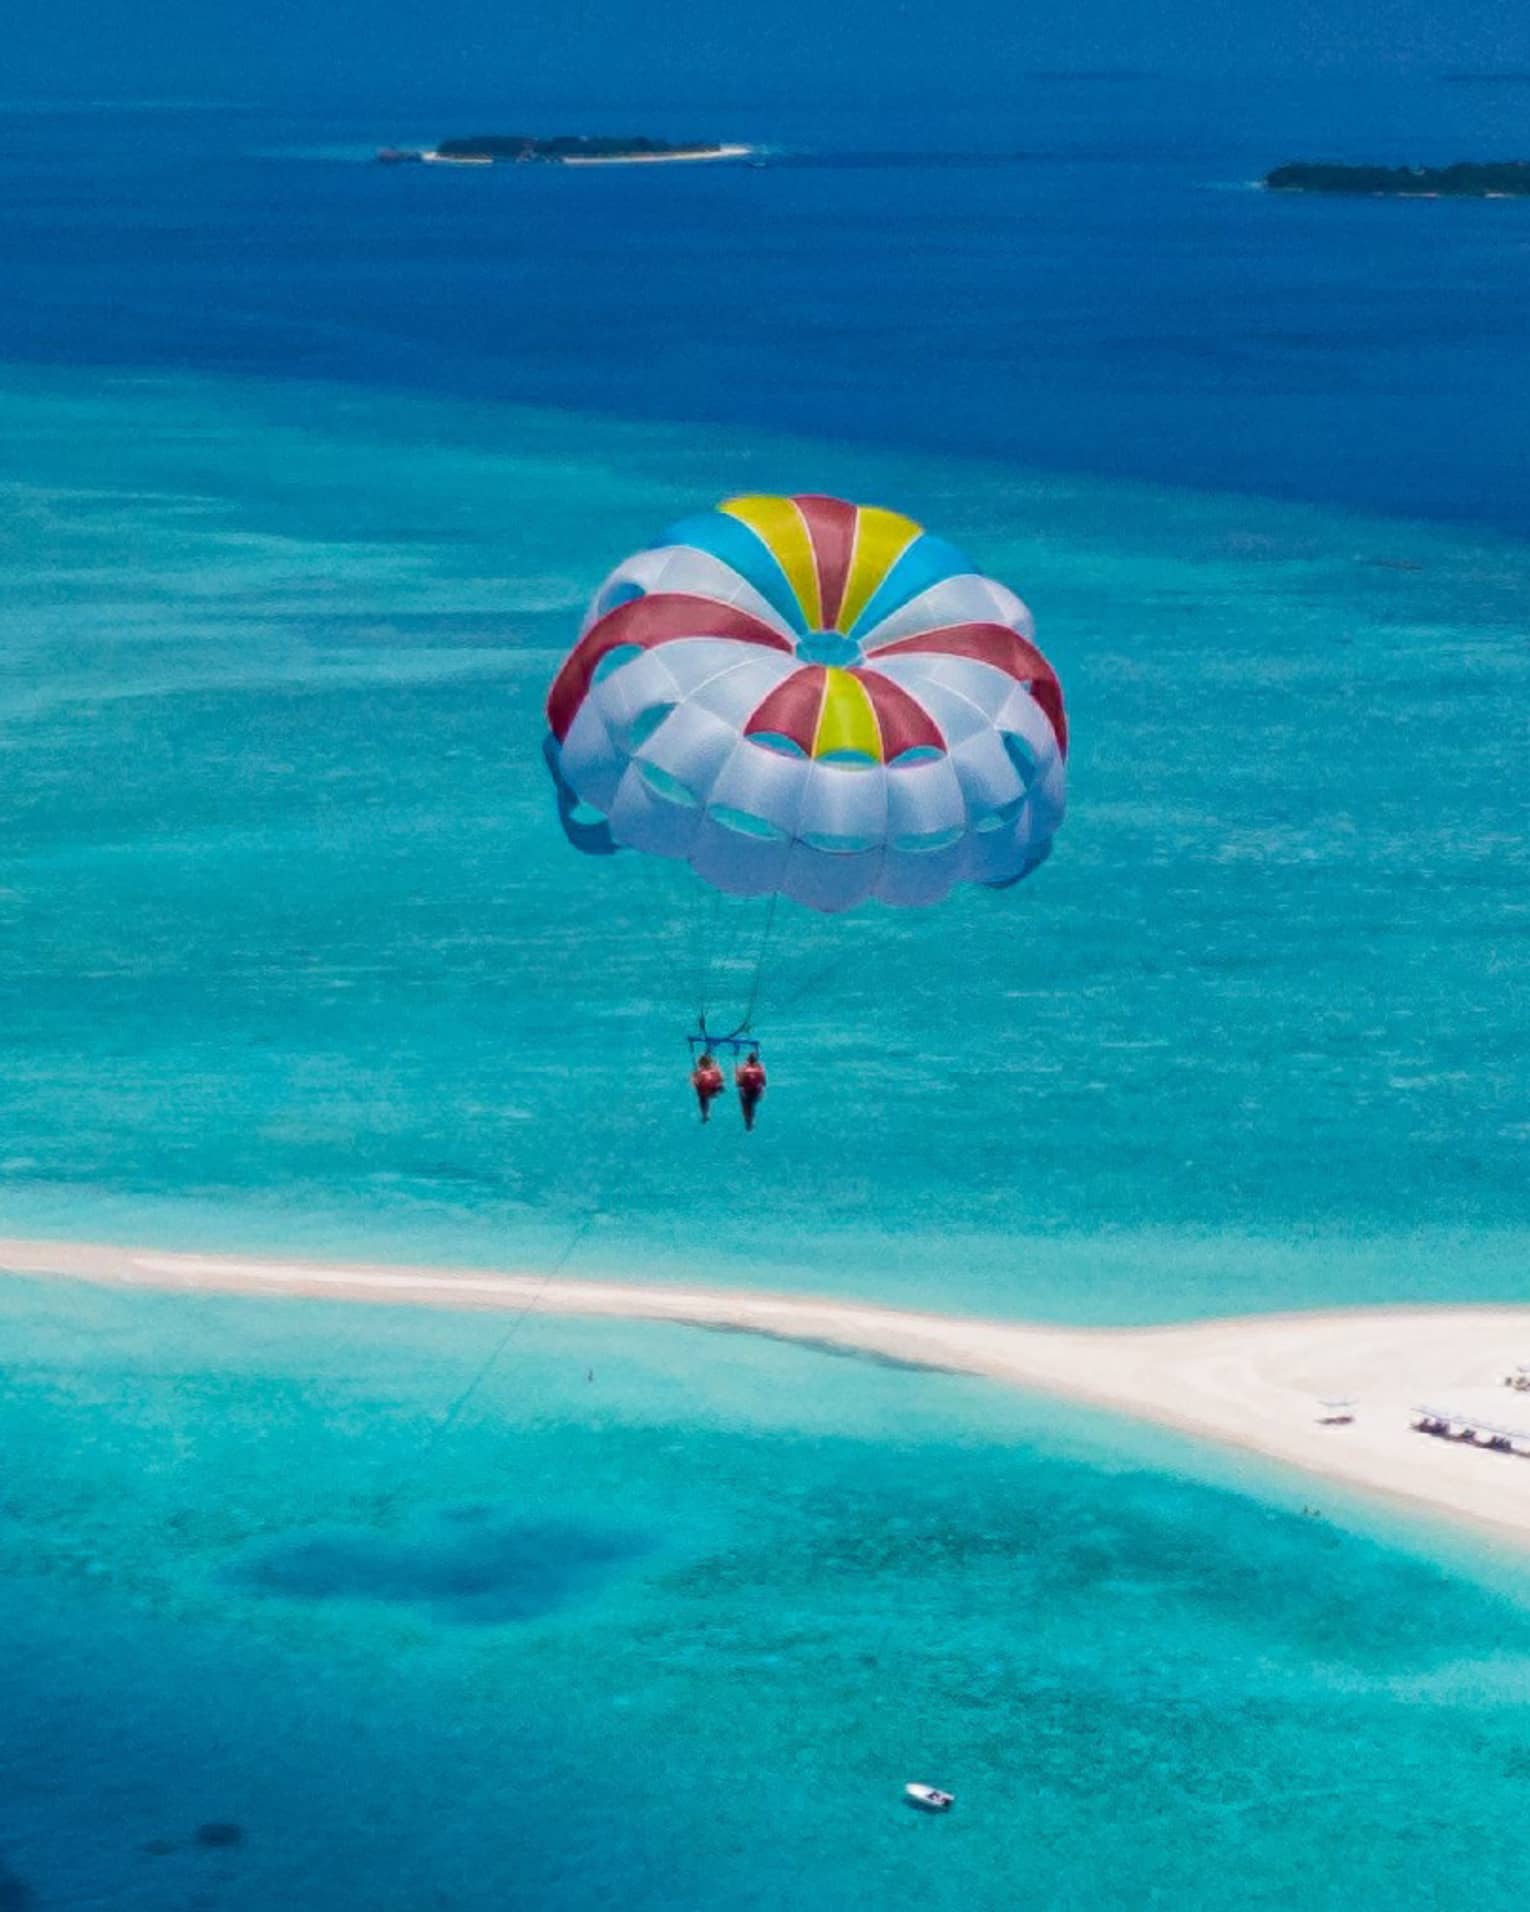 Aerial view of two people parasailing in tandem, colourful sail floating above an expanse of aqua water and a white sandbar.